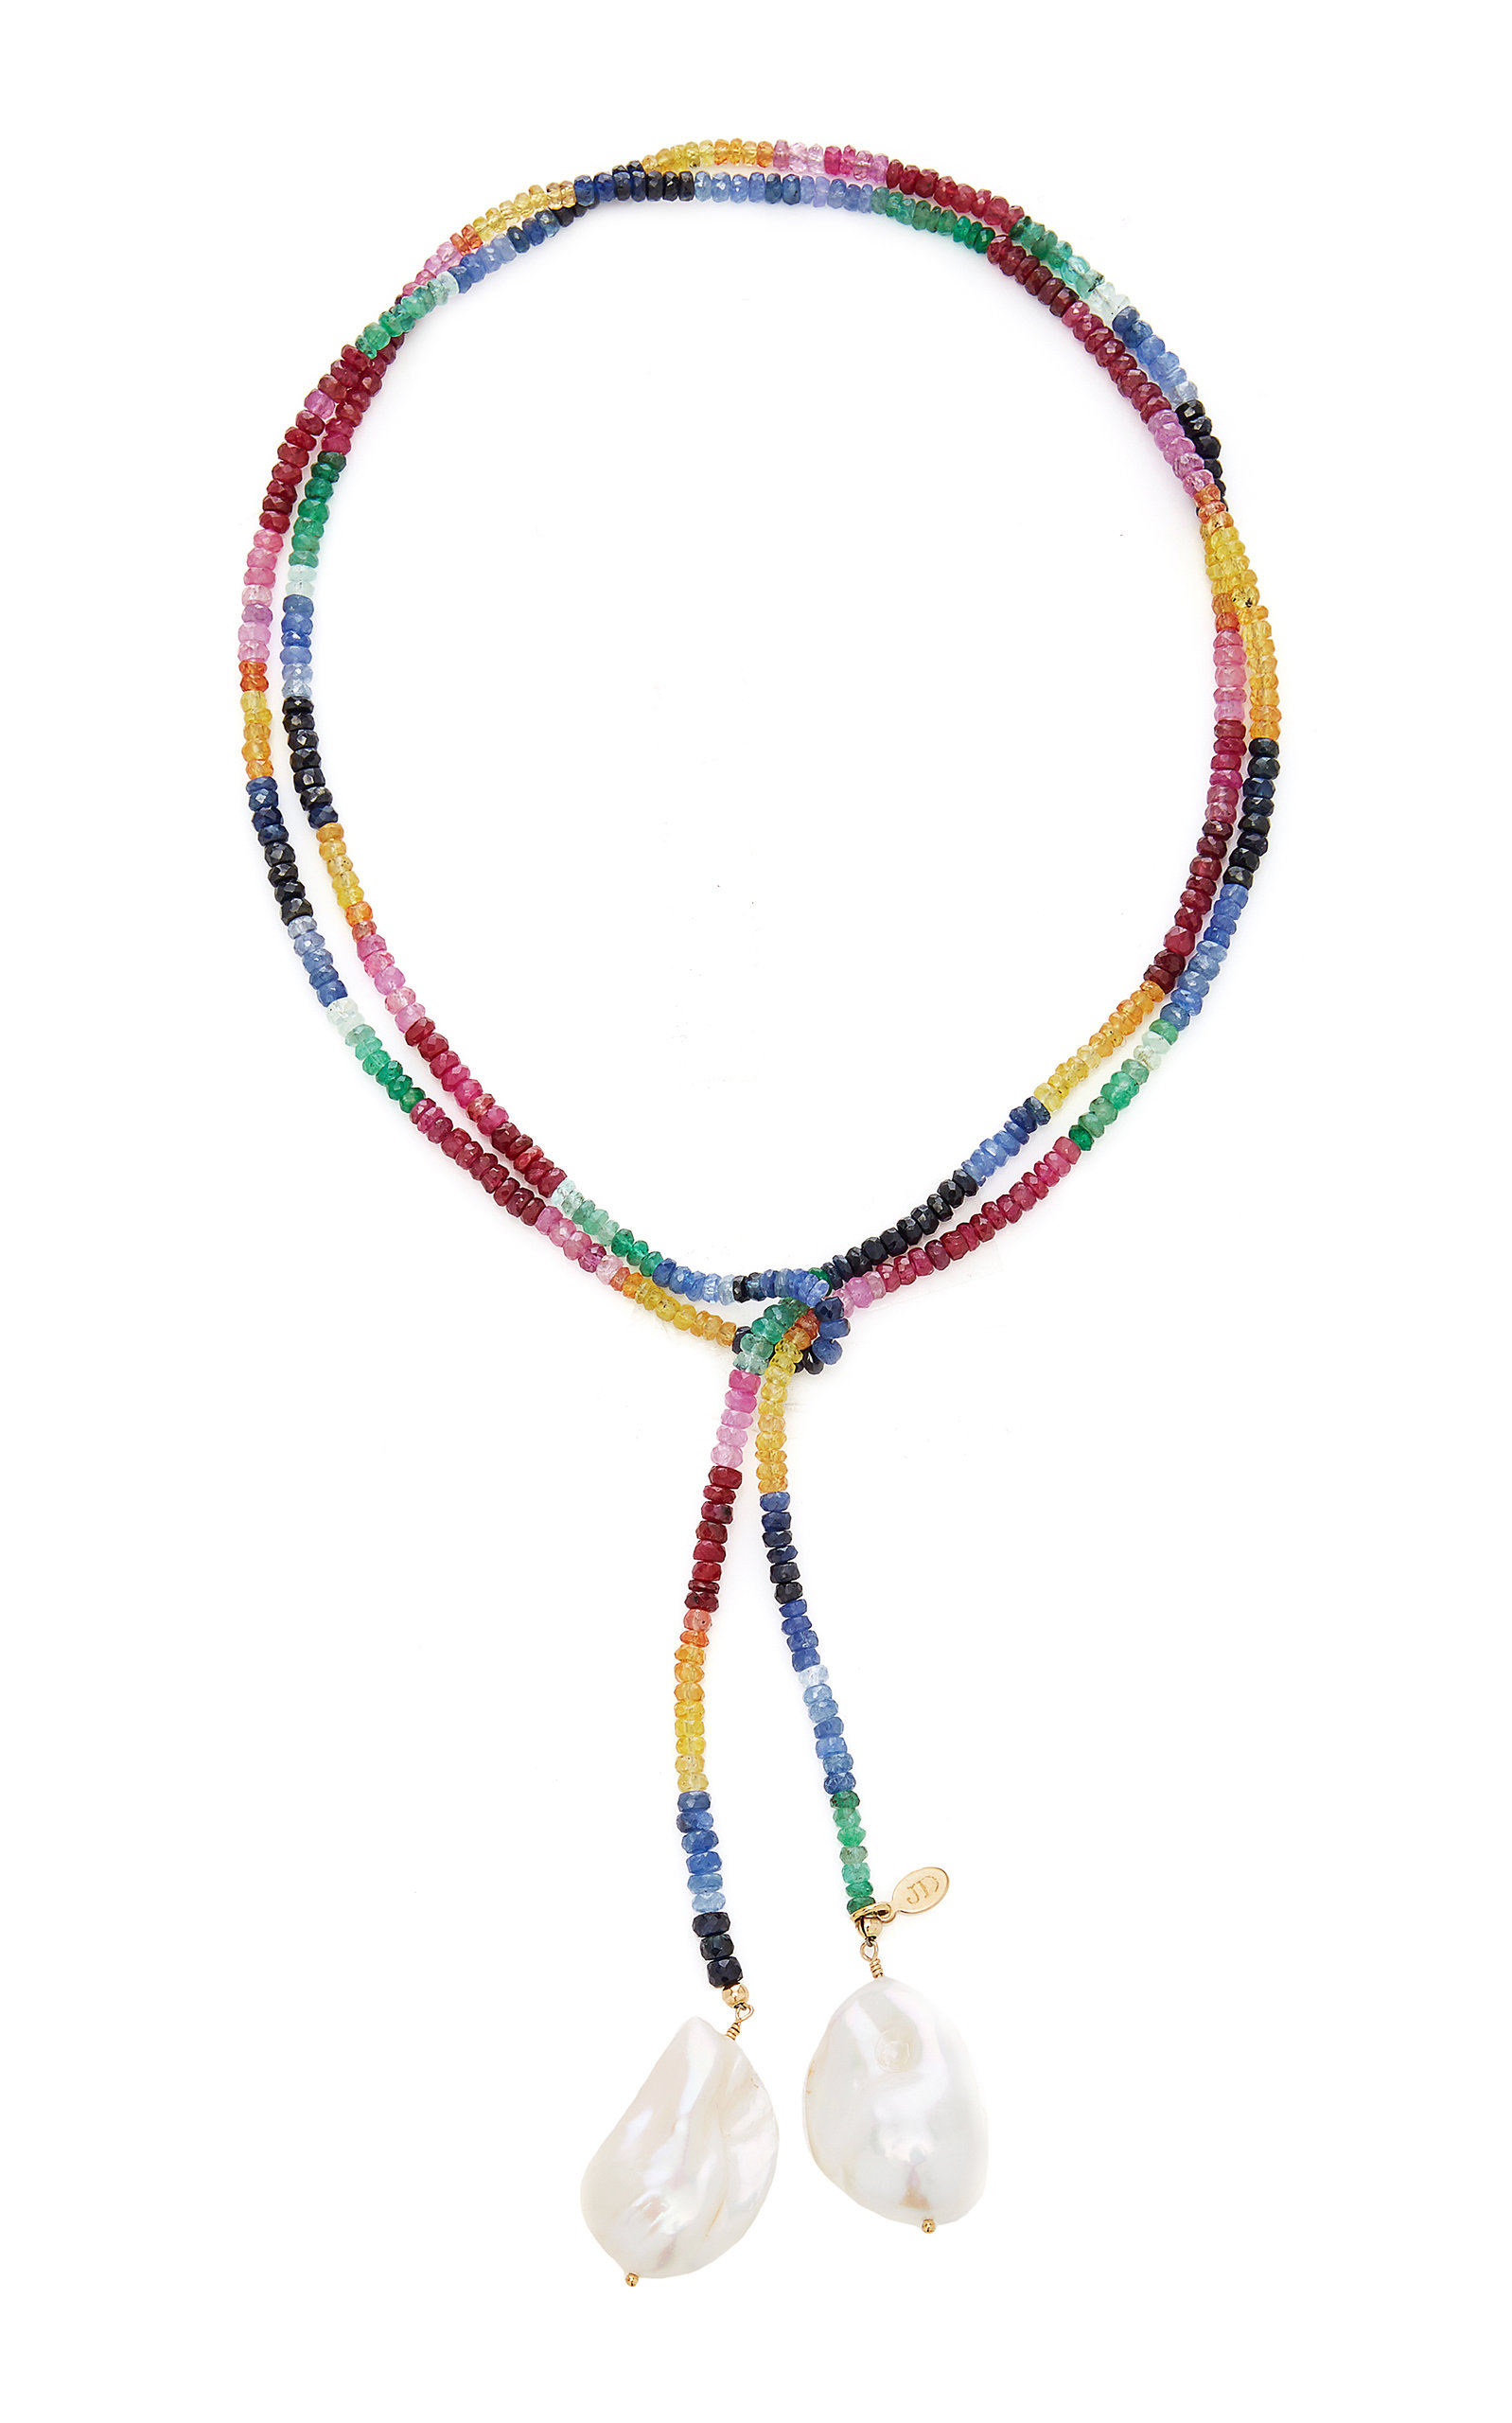 Joie DiGiovanni Women's Gold-Filled Ruby; Emerald; Sapphire and Pearl Necklace